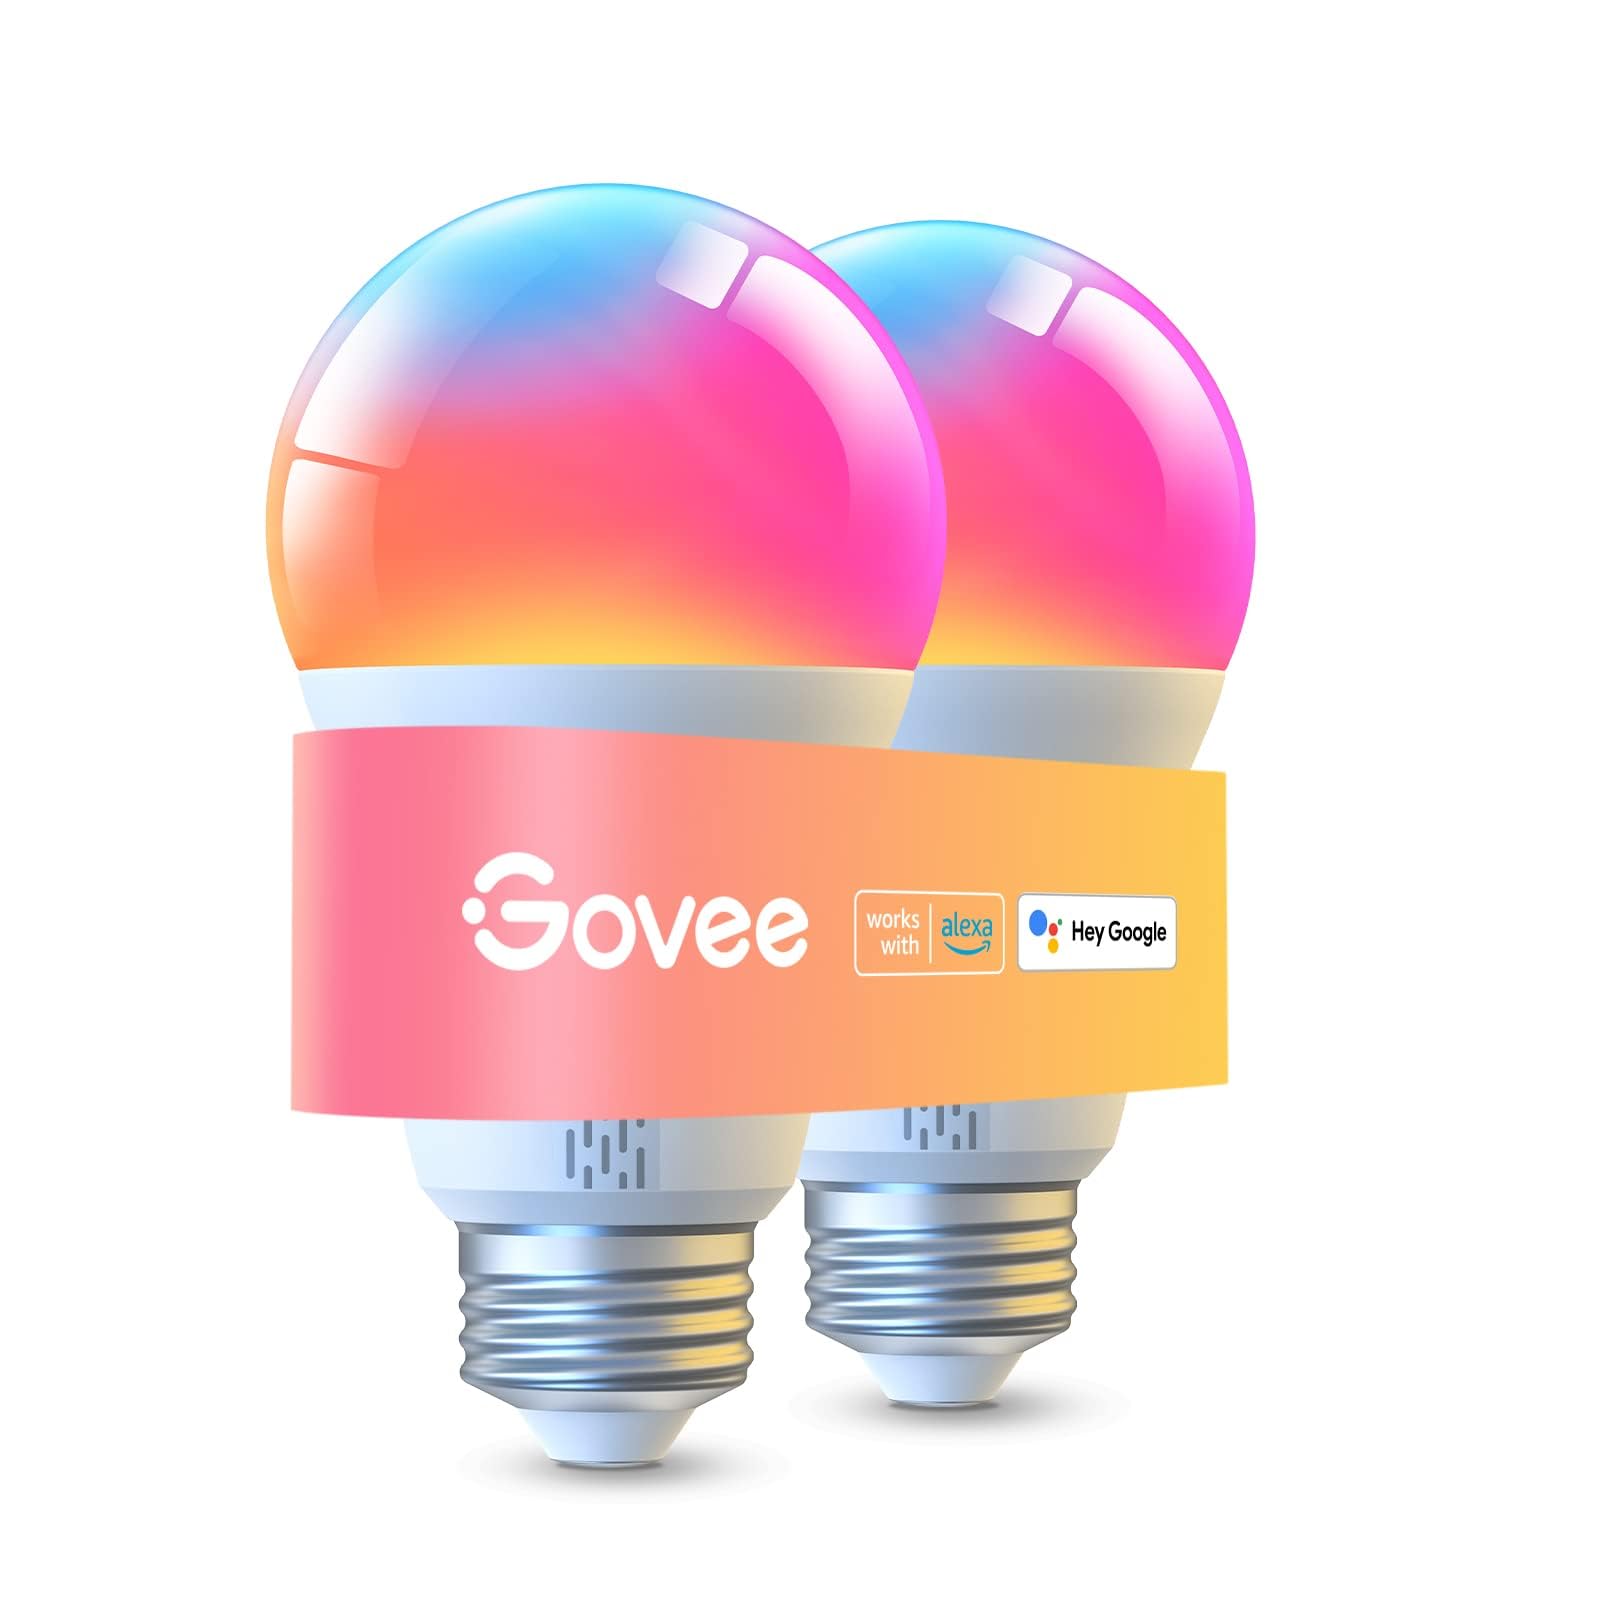 Govee LED Smart Light Bulbs, 1000LM Color Changing Light Bulb, Wi-Fi & Bluetooth Light Bulbs, Work with Alexa and Google Assistant, Dimmable RGBWW A19 75W Equivalent Smart Bulbs, 2 Pack